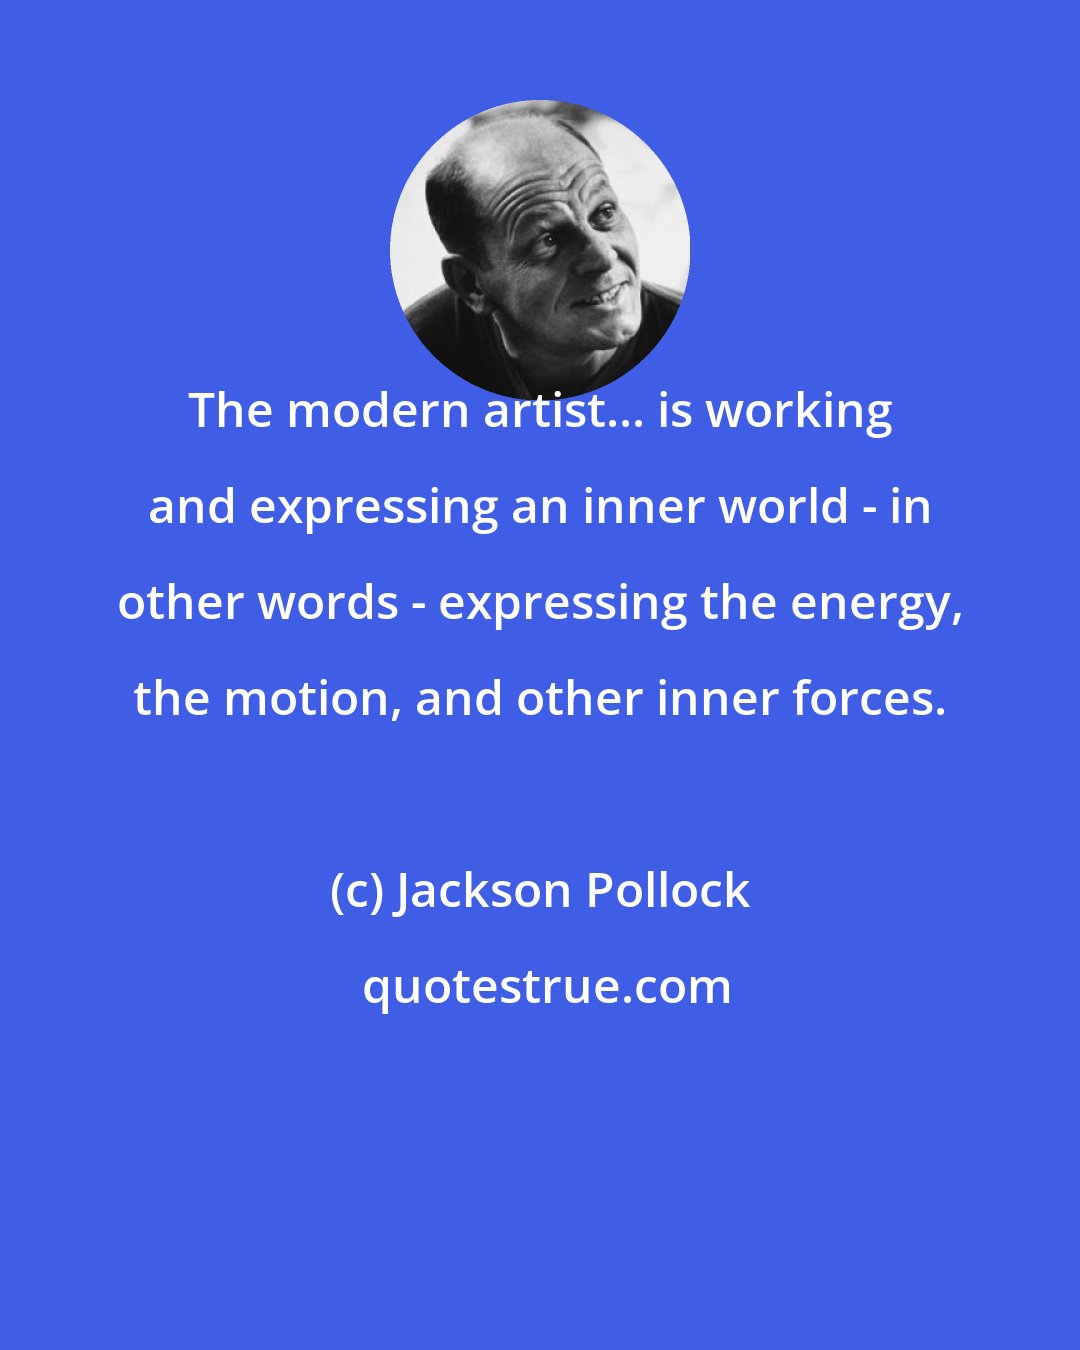 Jackson Pollock: The modern artist... is working and expressing an inner world - in other words - expressing the energy, the motion, and other inner forces.